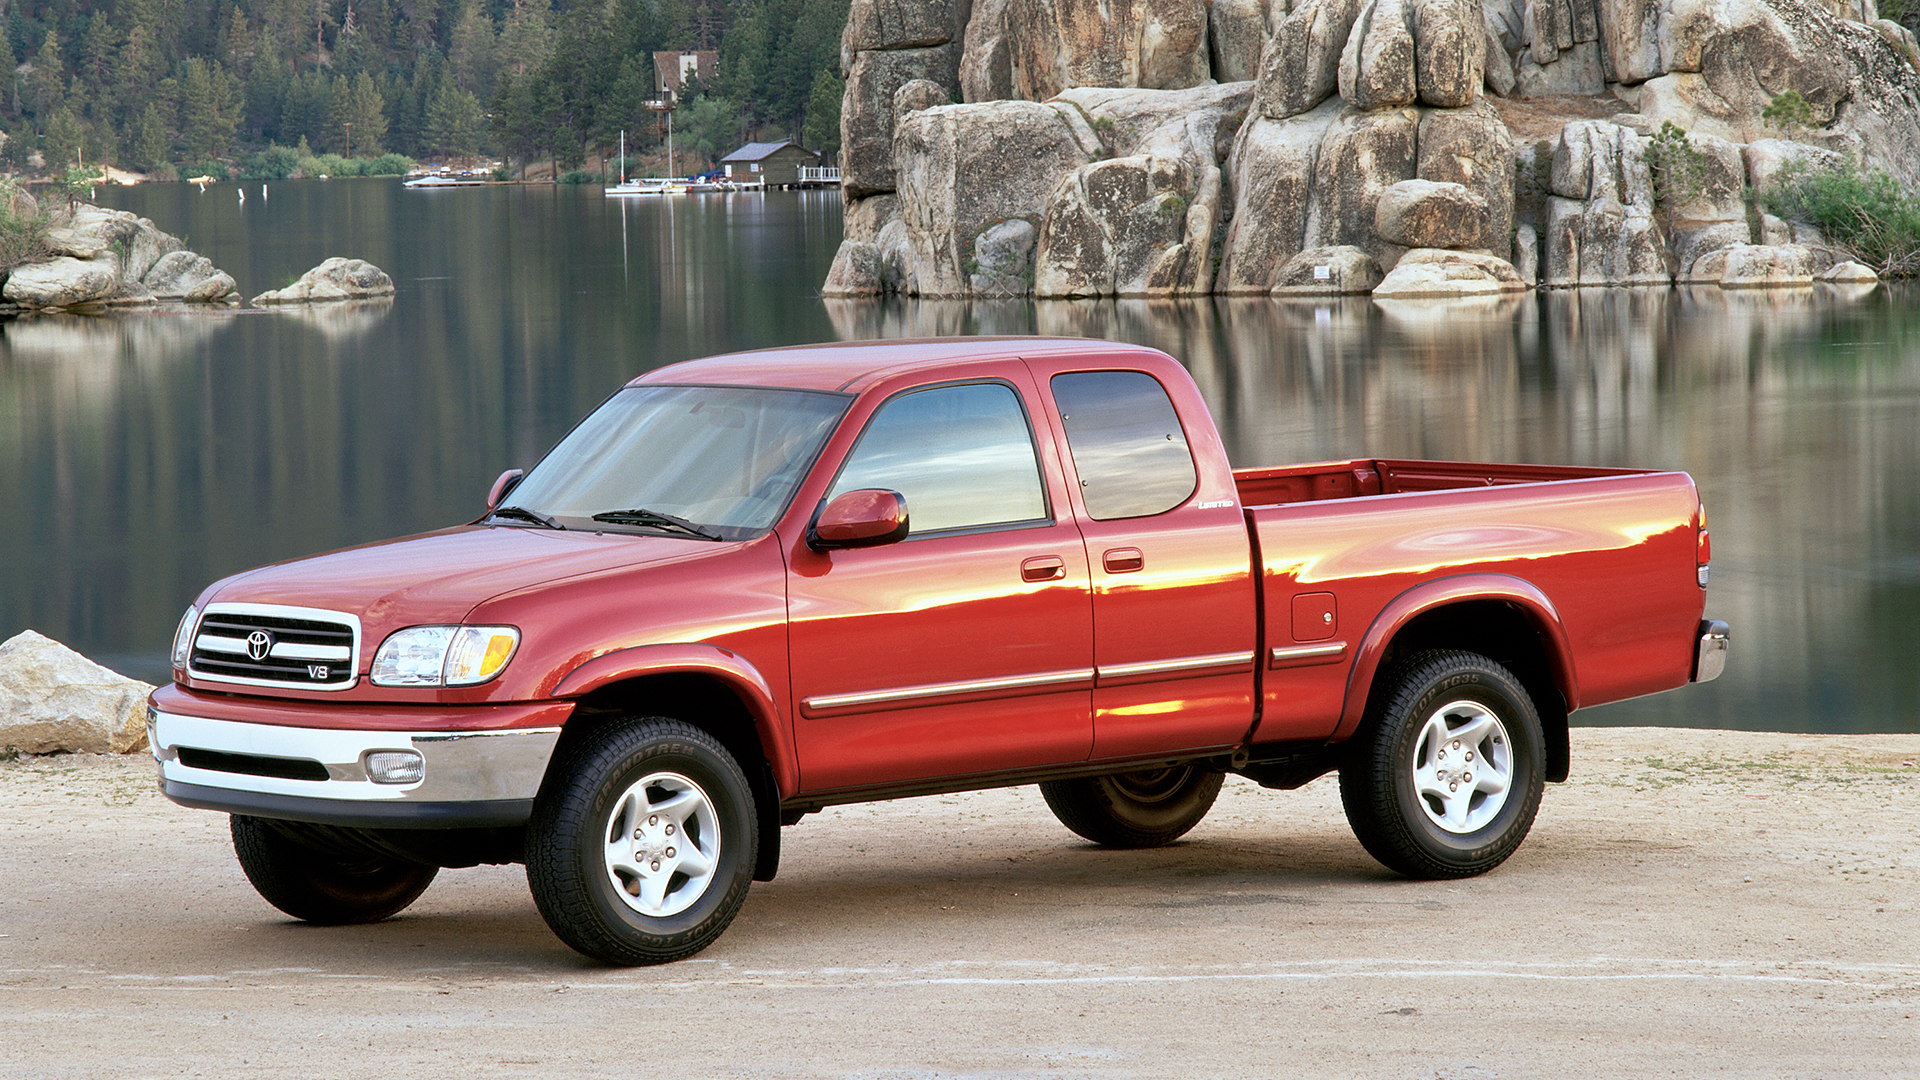 Look for more affordability in a Tundra.